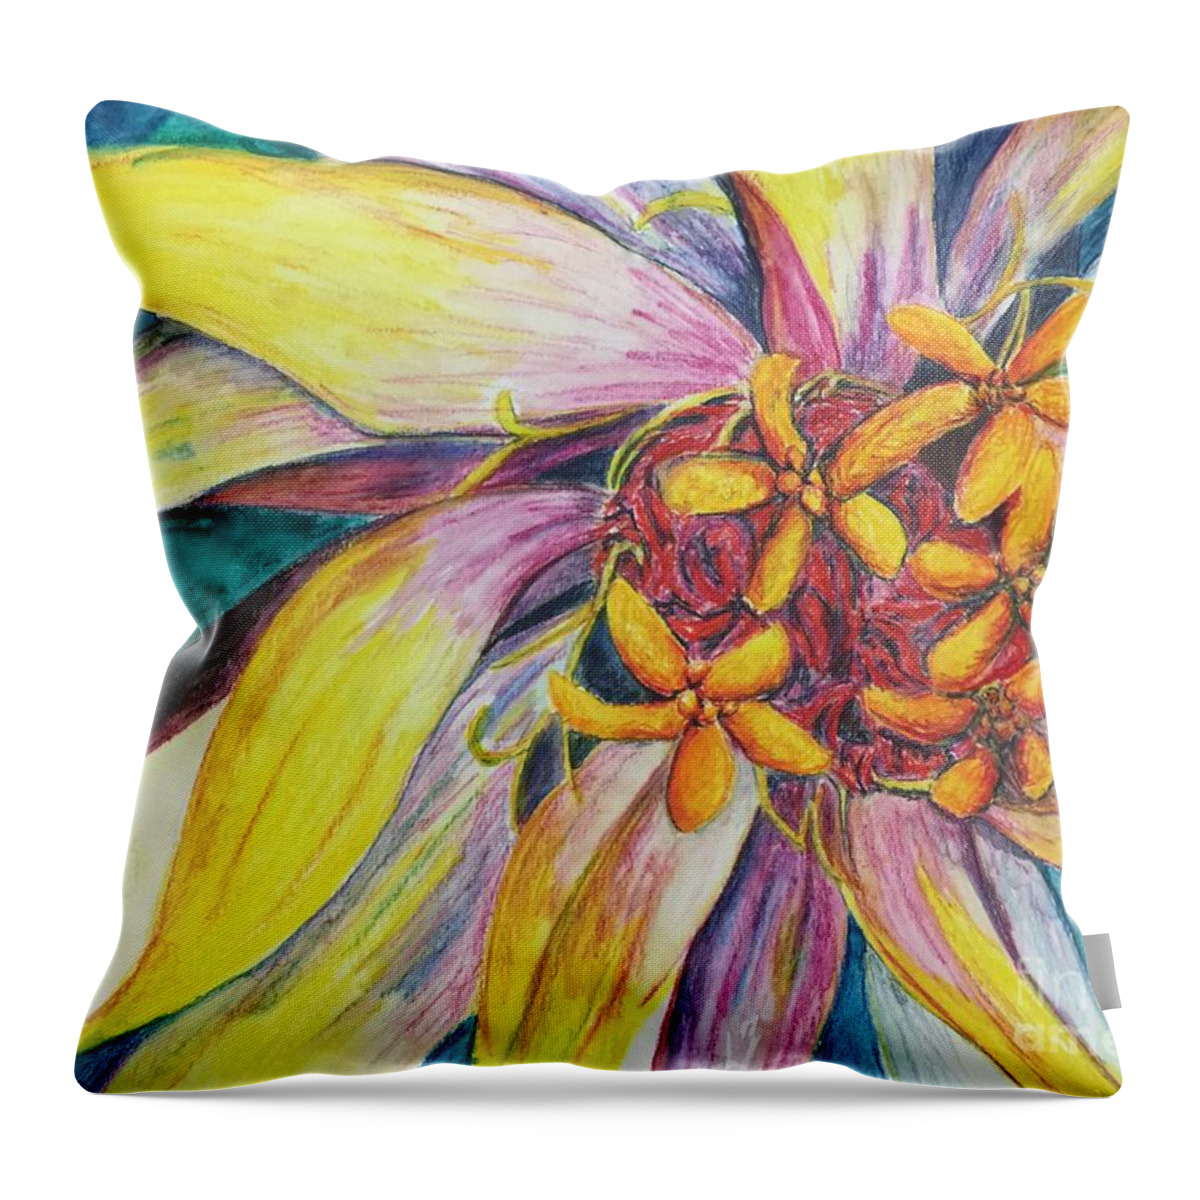 Macro Throw Pillow featuring the painting Kaleidoscope by Vonda Lawson-Rosa